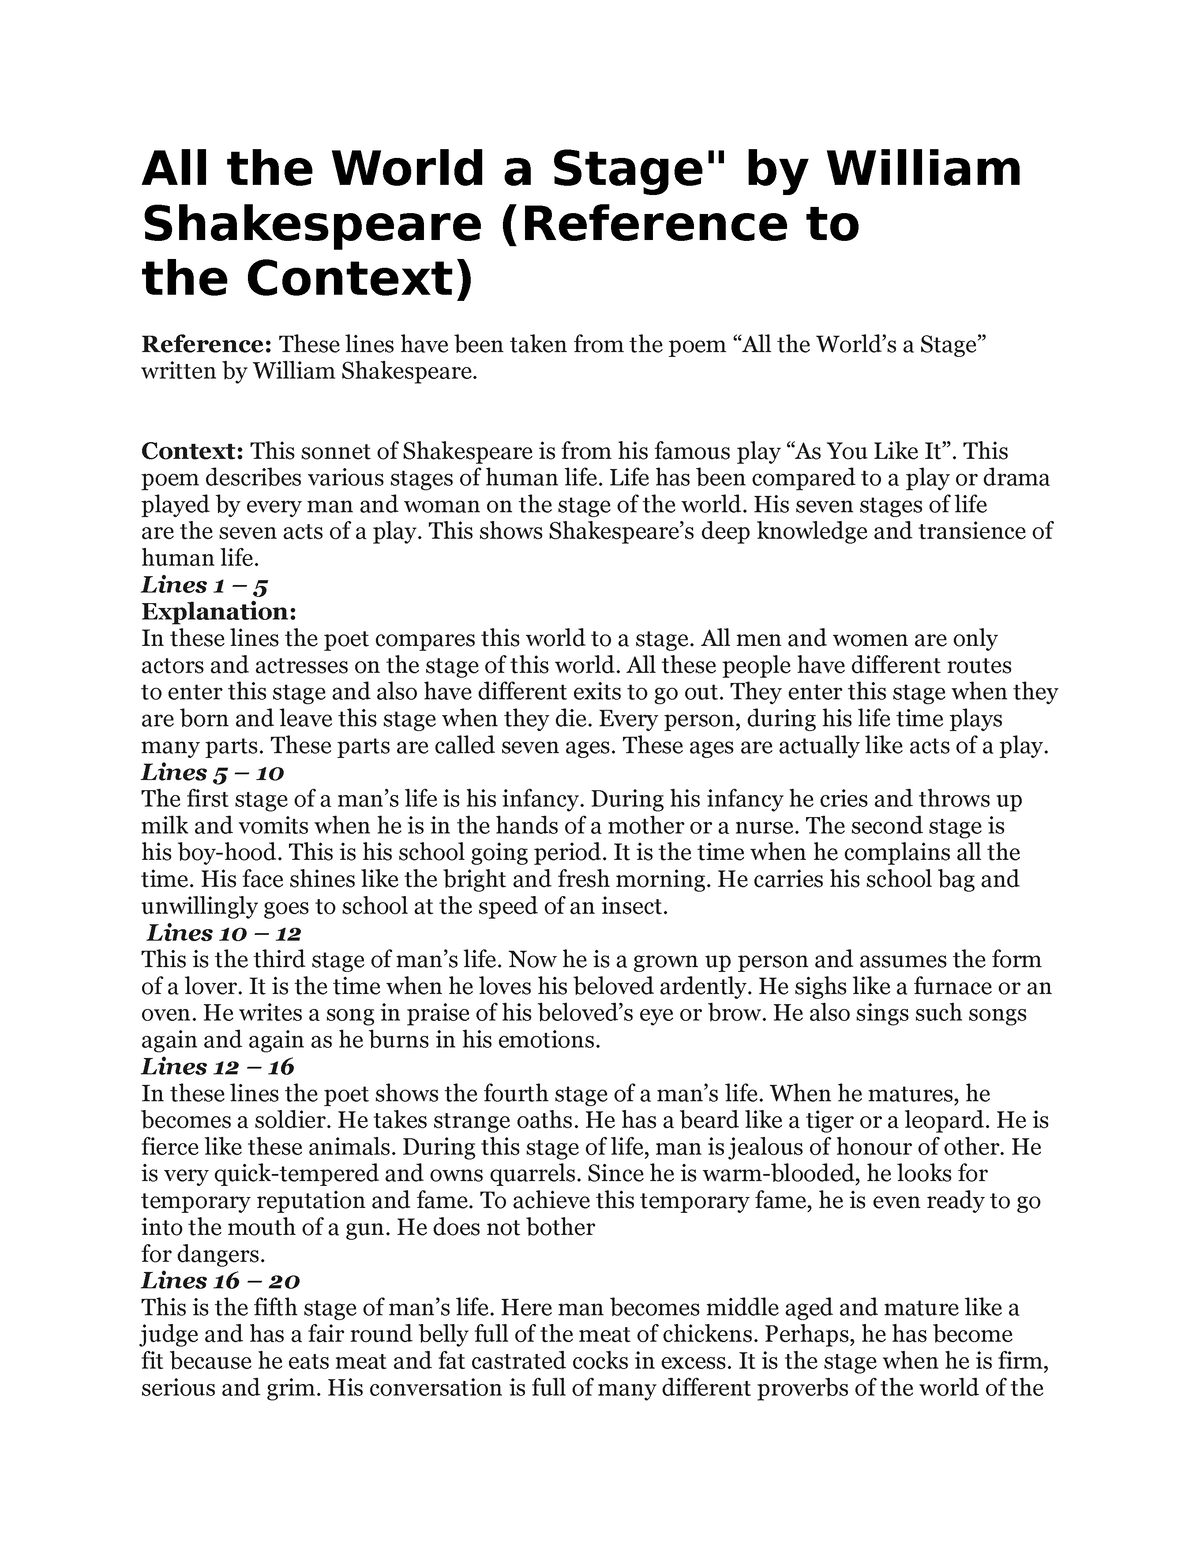 shakespeare fools and clowns essay